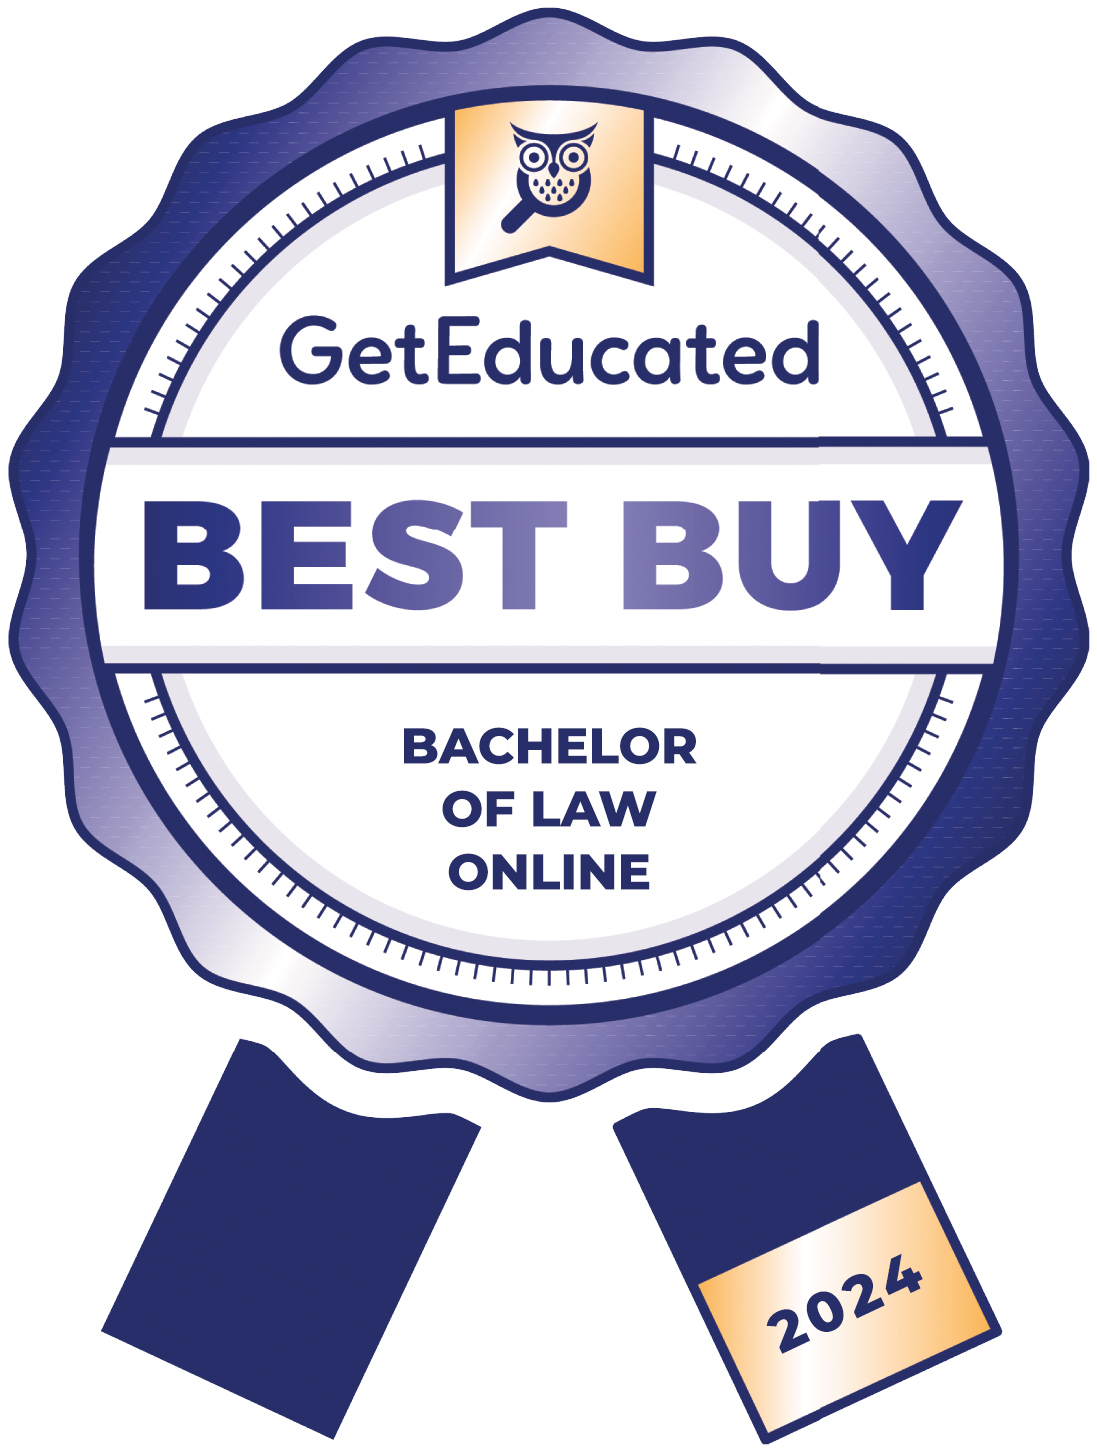 Rankings of the cheapest bachelor of law online programs